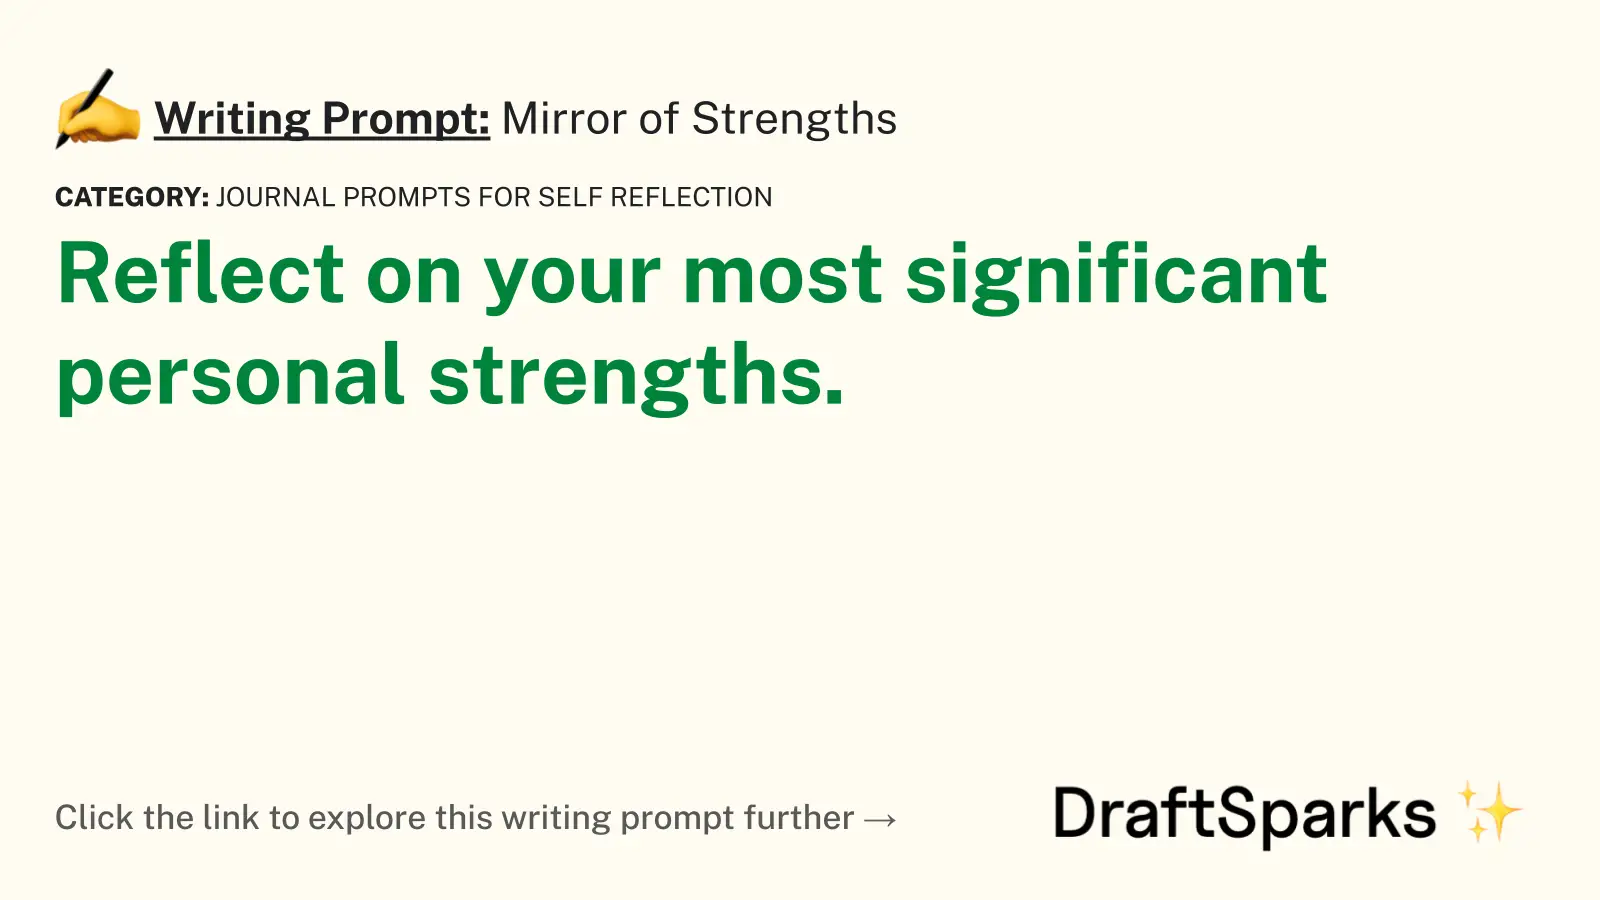 Mirror of Strengths